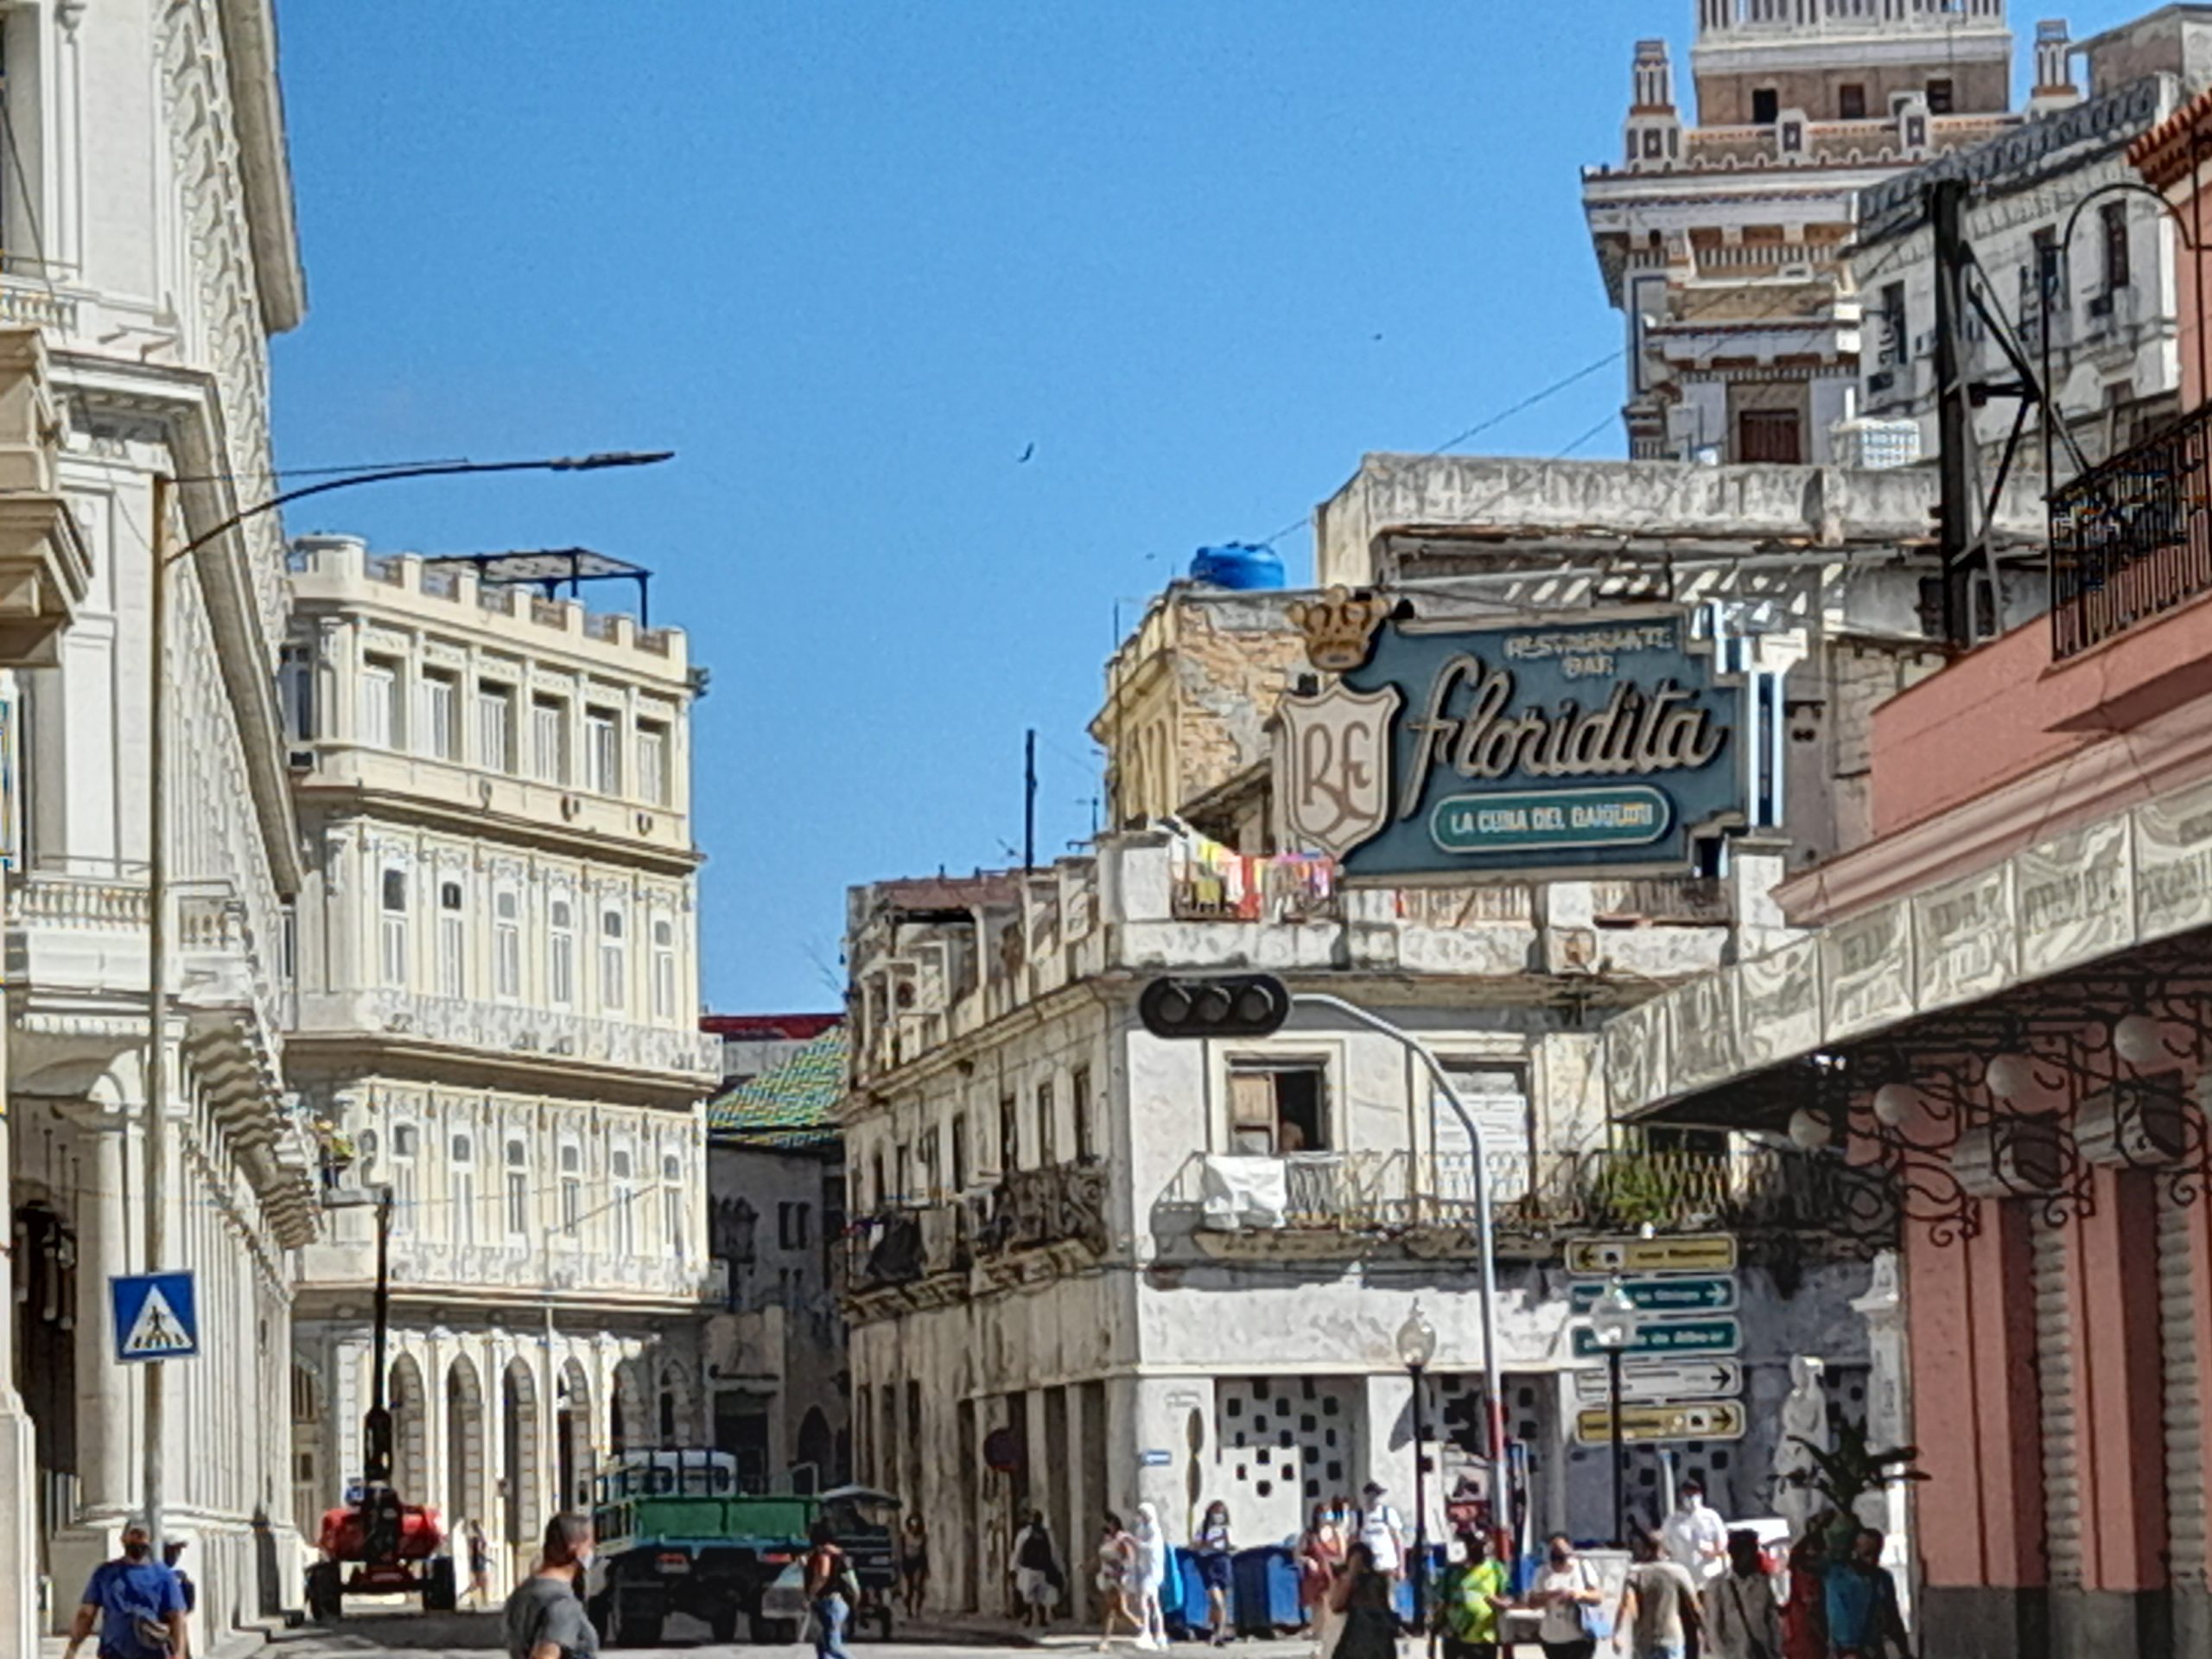 "Explore Havana's Iconic Sites in a Classic Car on a 3-Hour Tour"